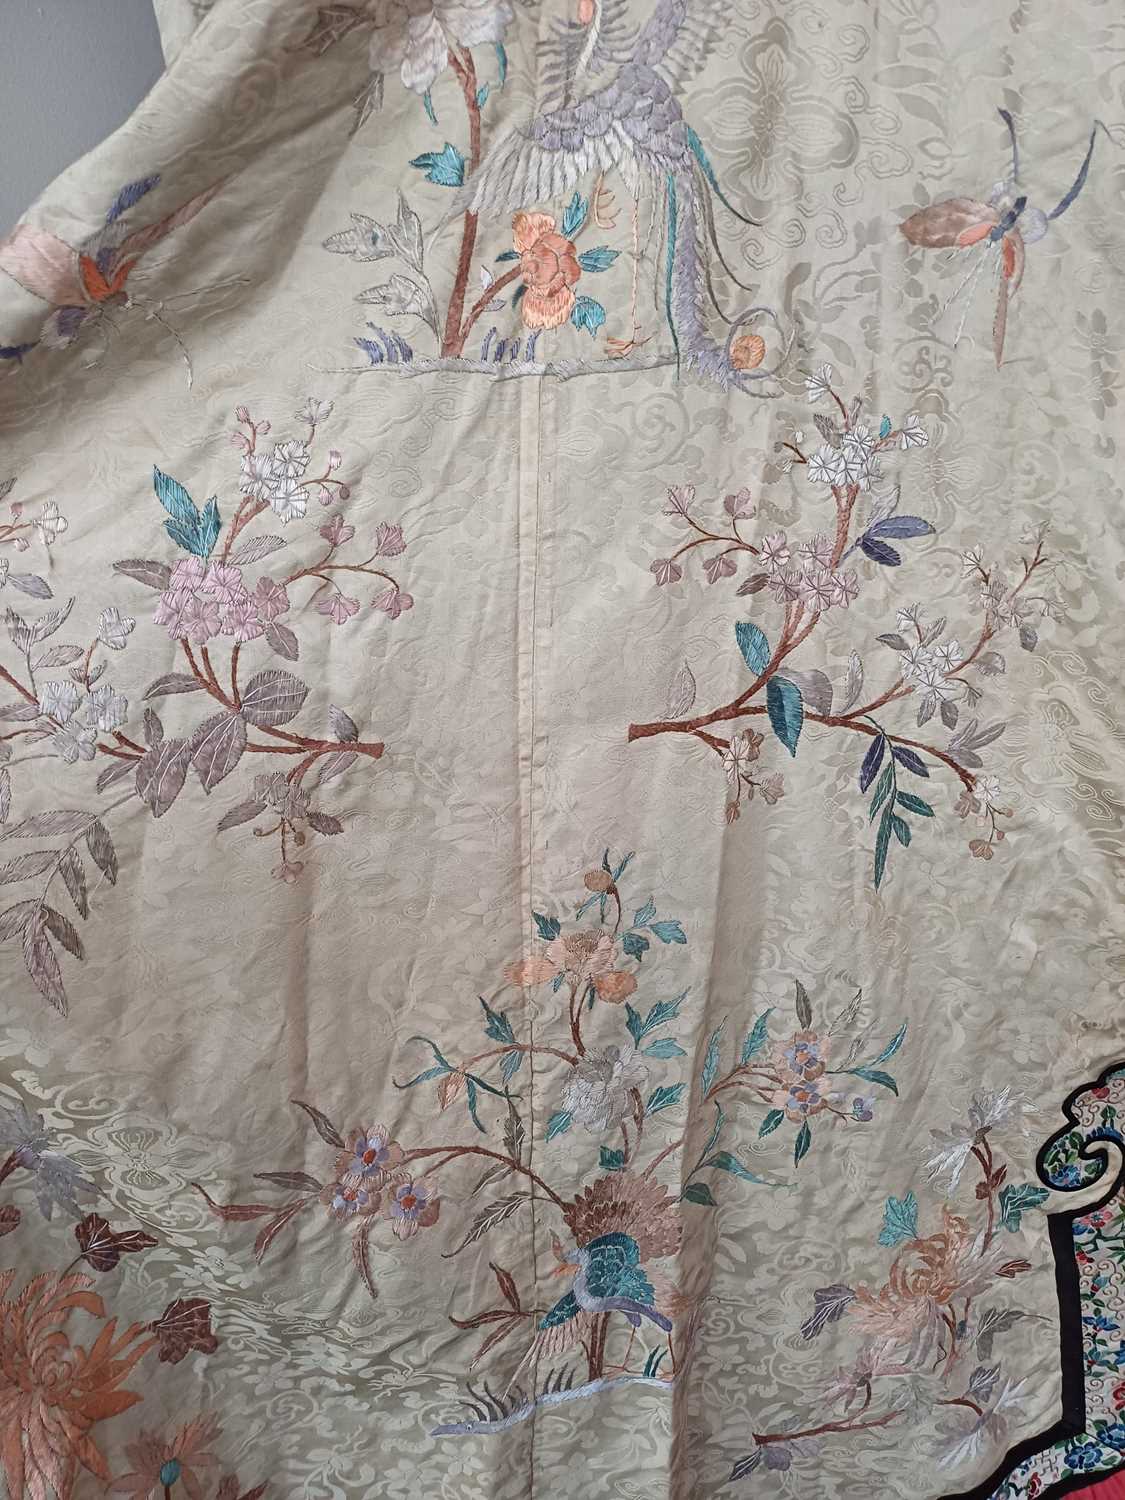 Early 20th Century Chinese Dark Cream Figured Silk Robe embroidered with decorative birds and floral - Image 6 of 31